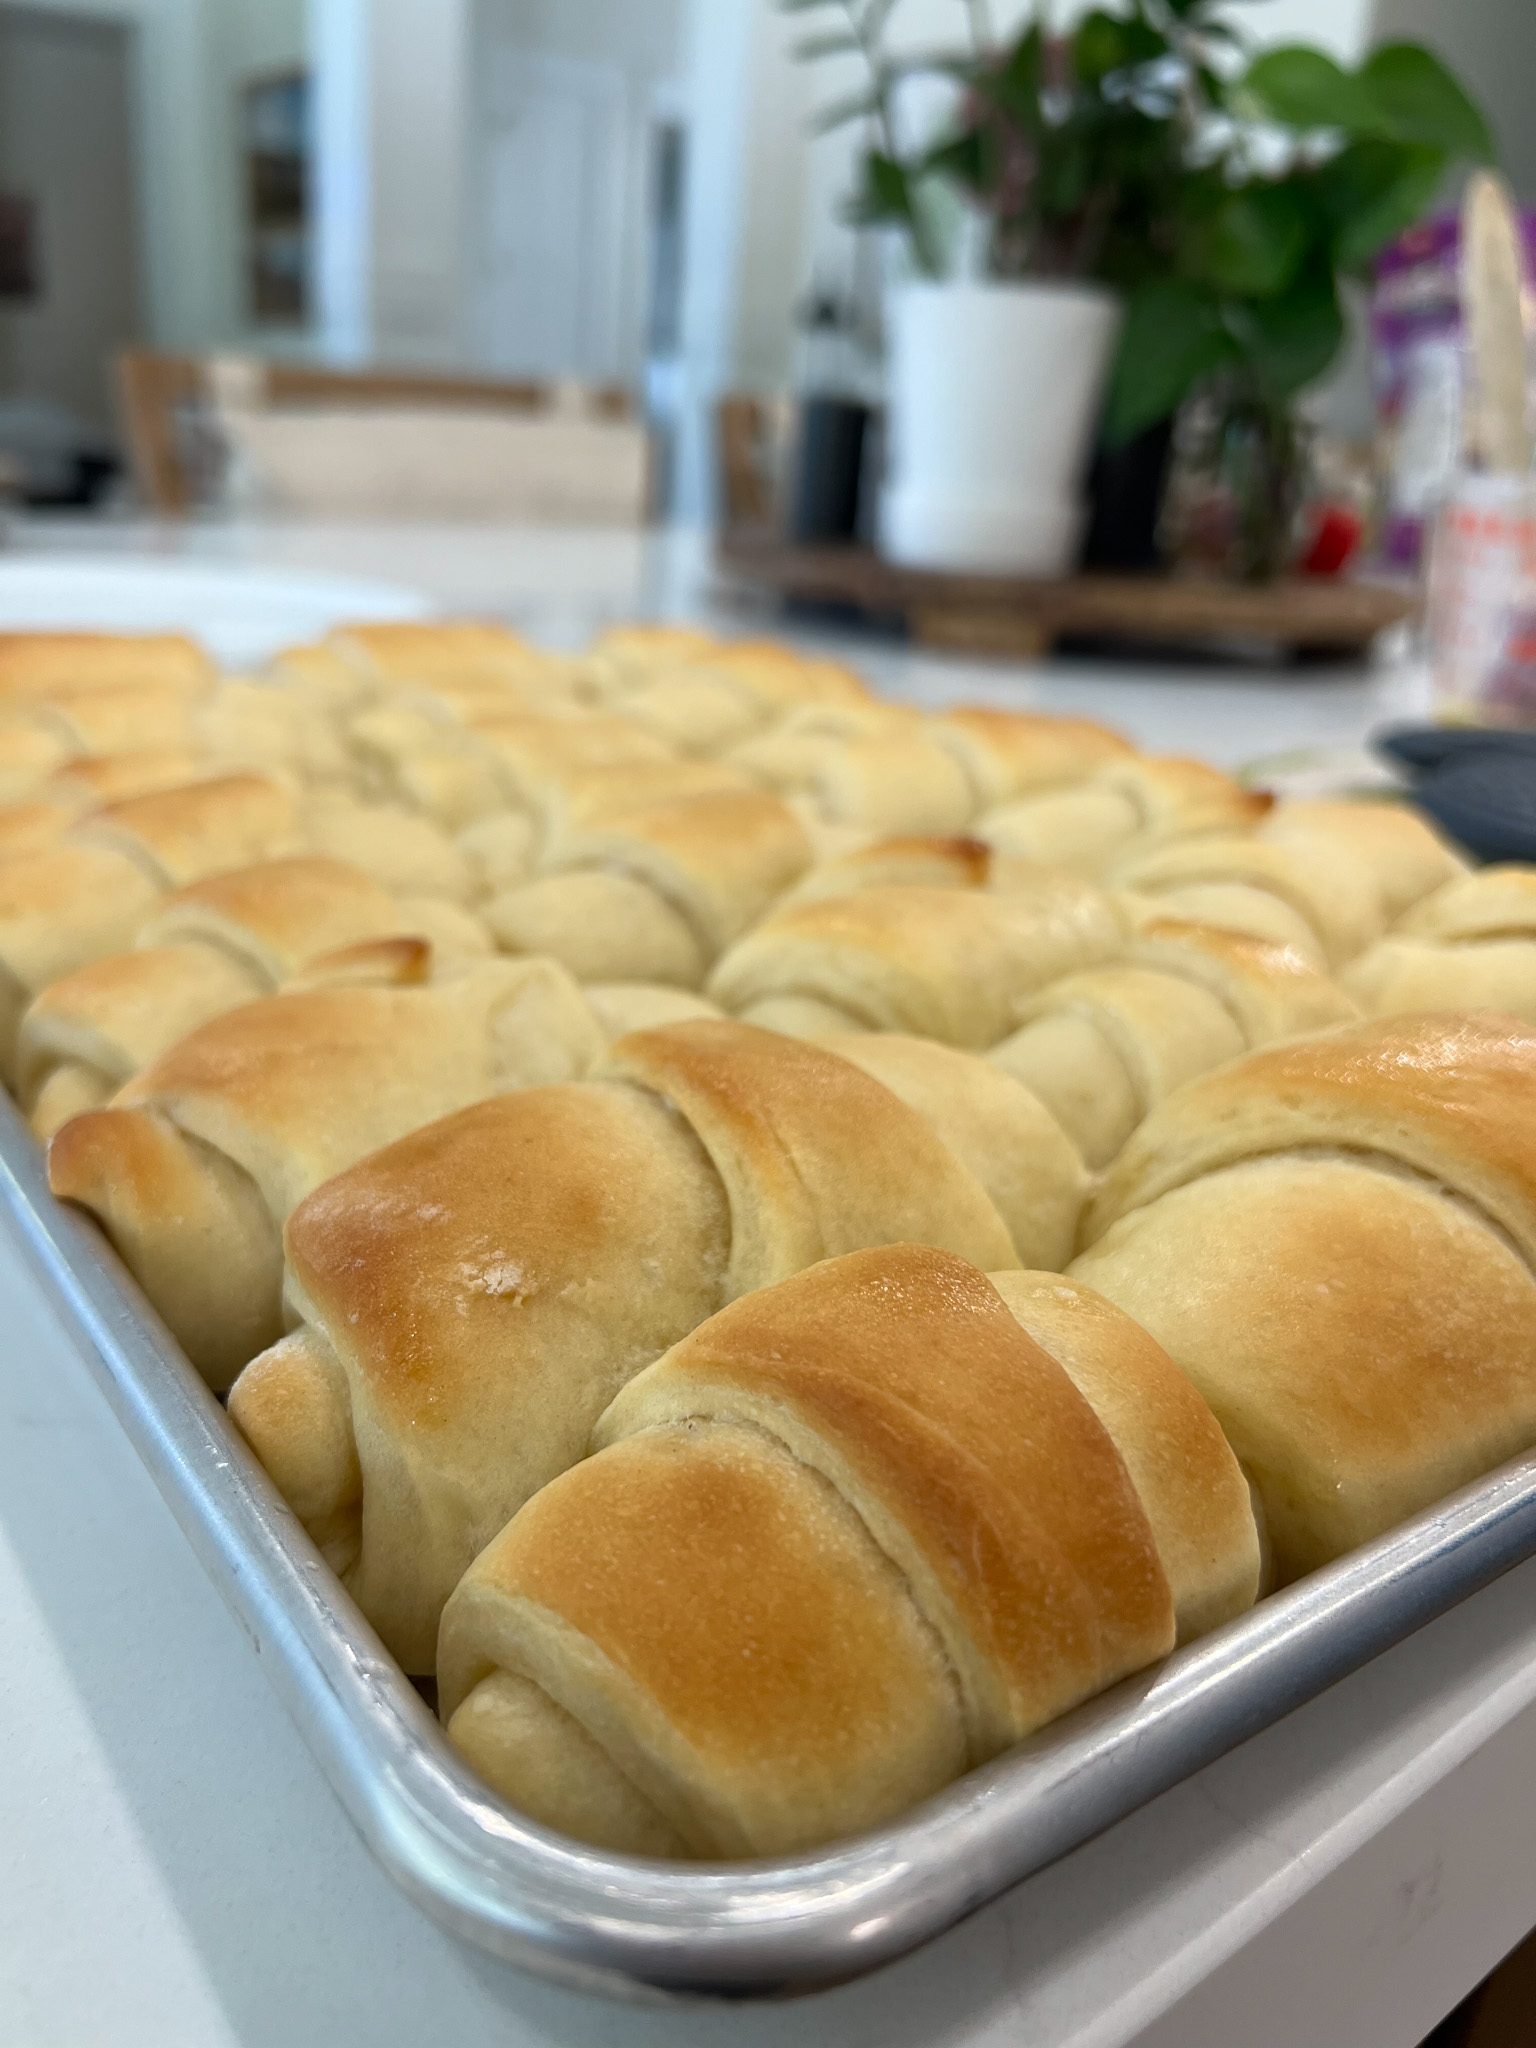 Easy Batter Rolls Recipe: How to Make It